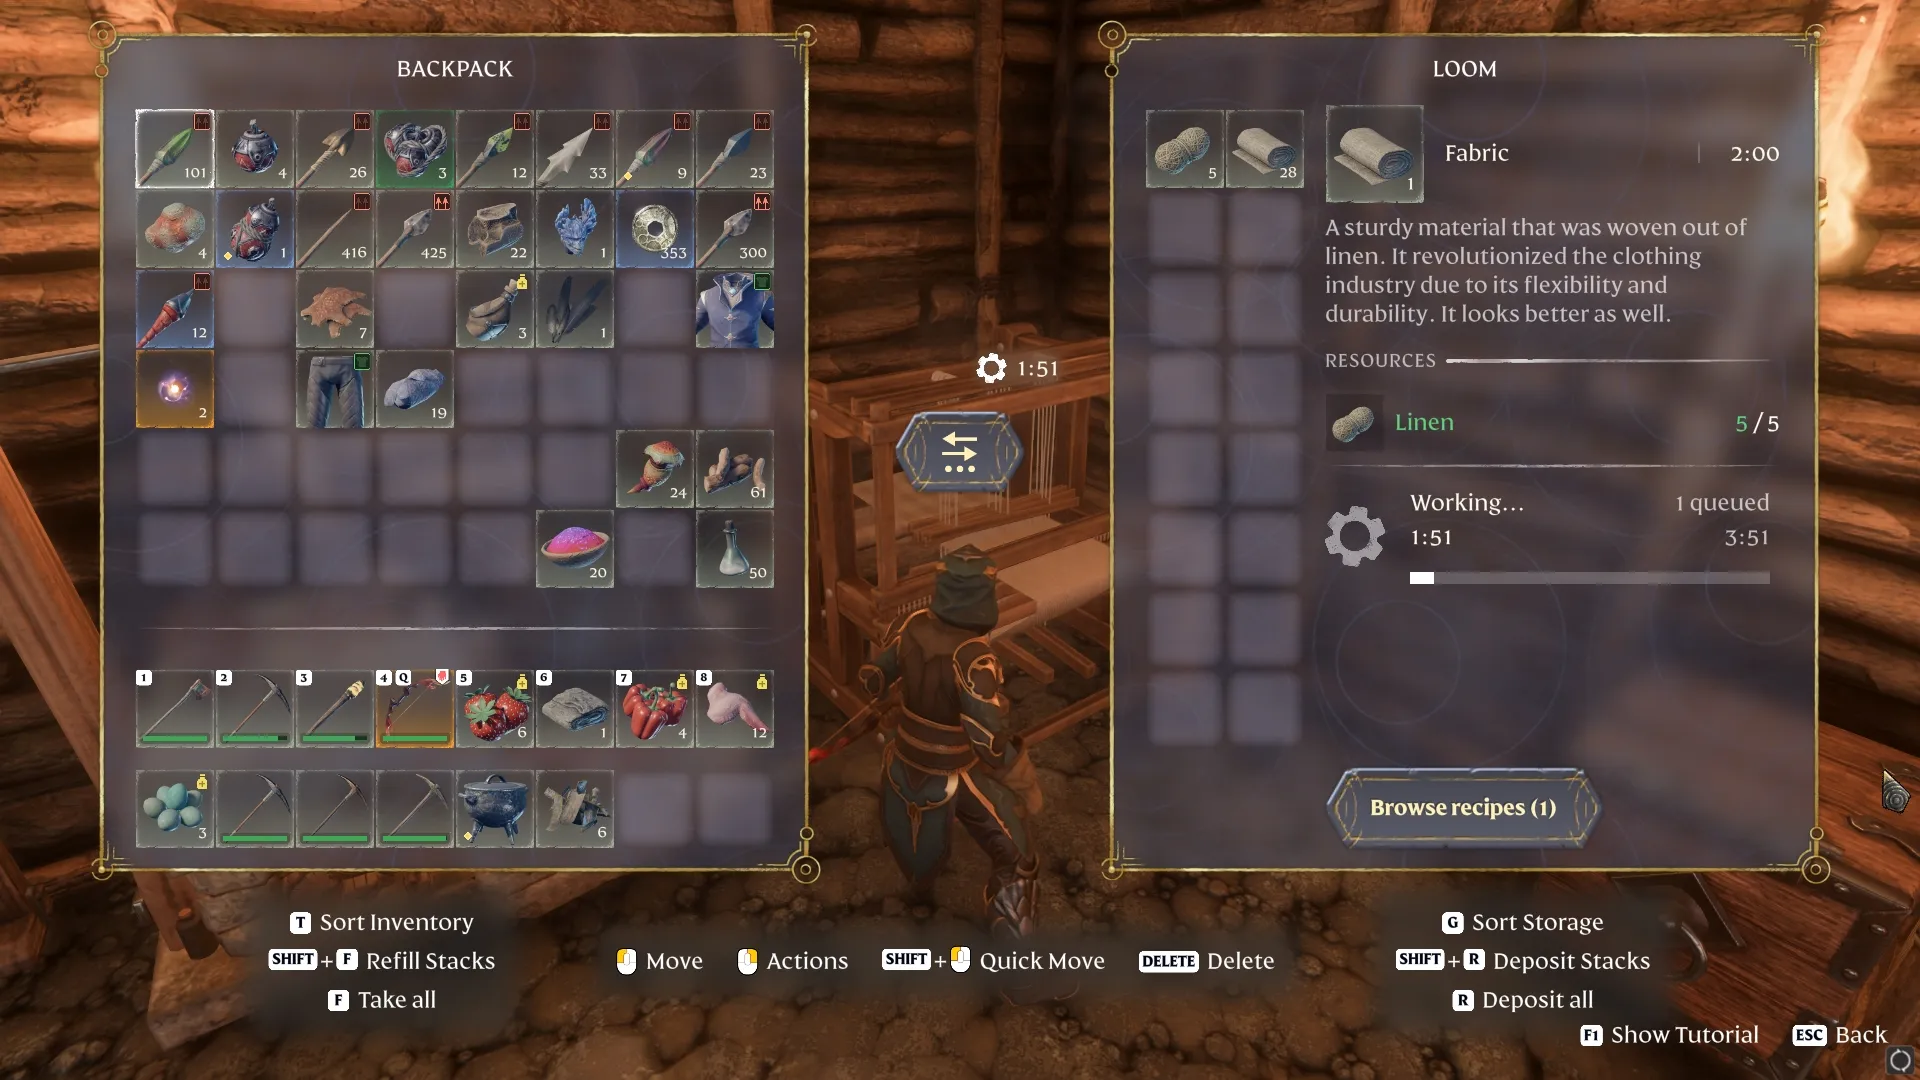 Crafting menu for Fabrics in the Loom in Enshrouded.